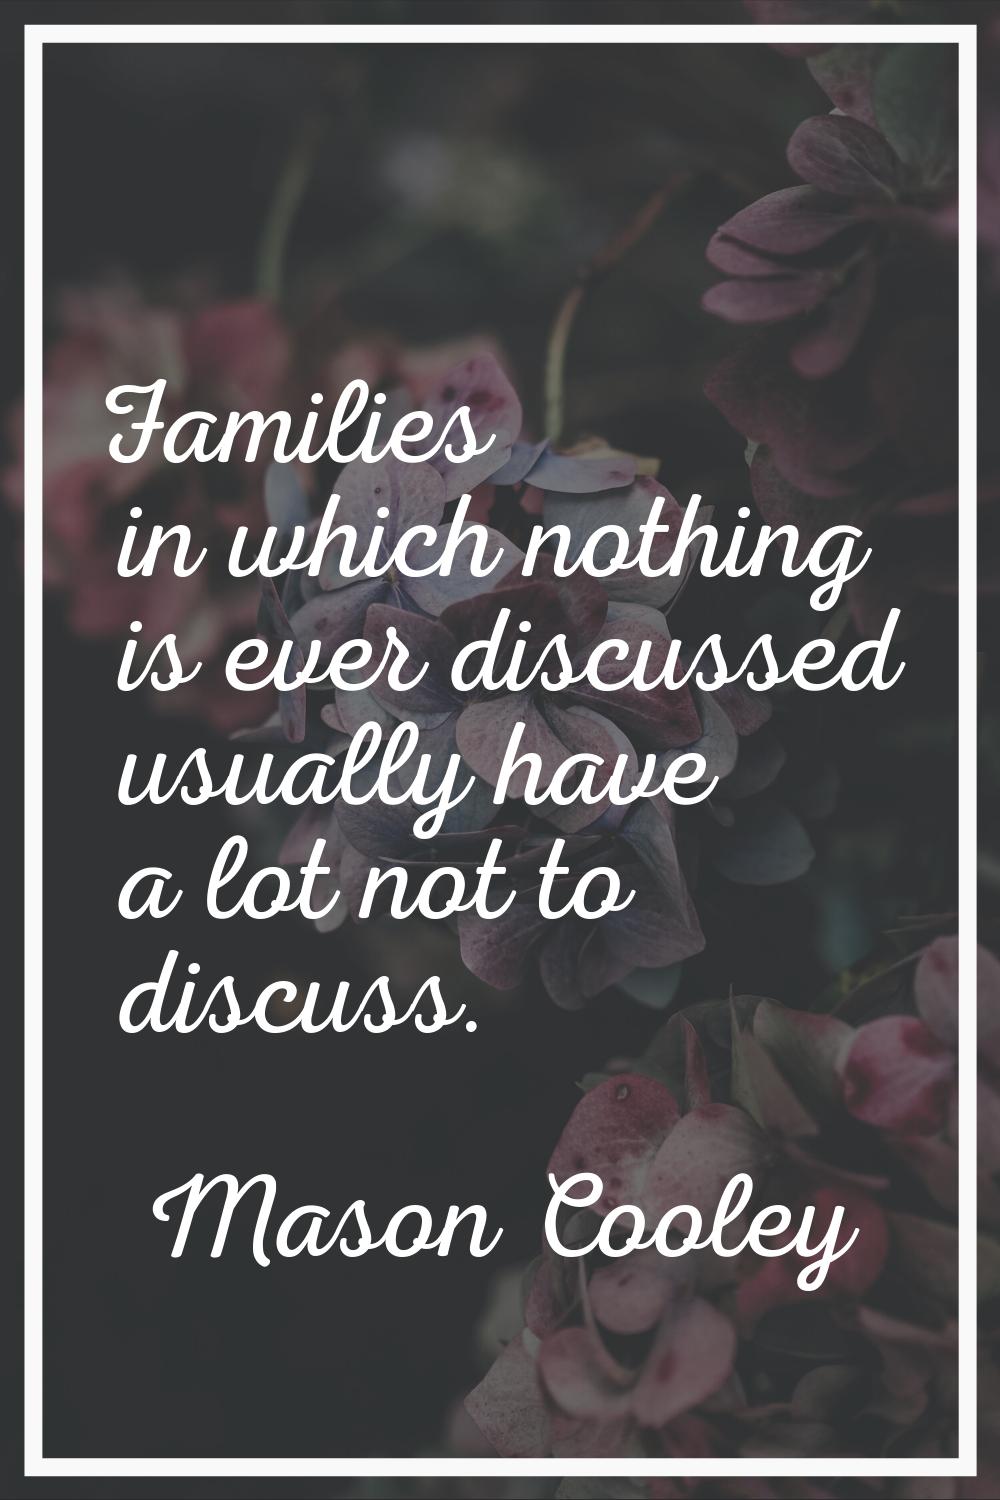 Families in which nothing is ever discussed usually have a lot not to discuss.